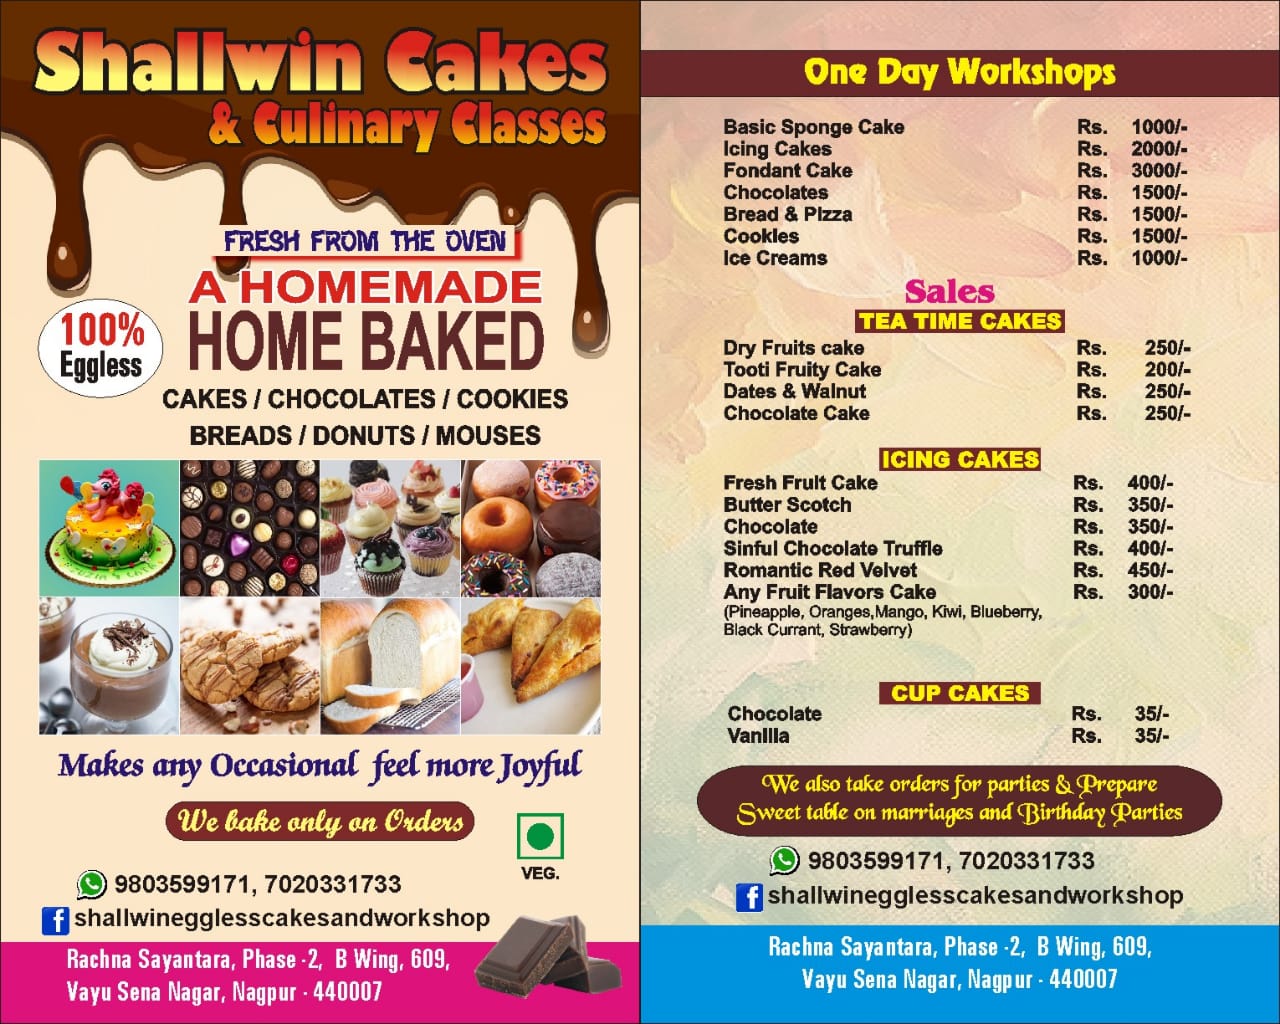 Aryanu Cakes And Baking Classes in Hingana RoadNagpur  Best Cookery  Classes For Cake in Nagpur  Justdial